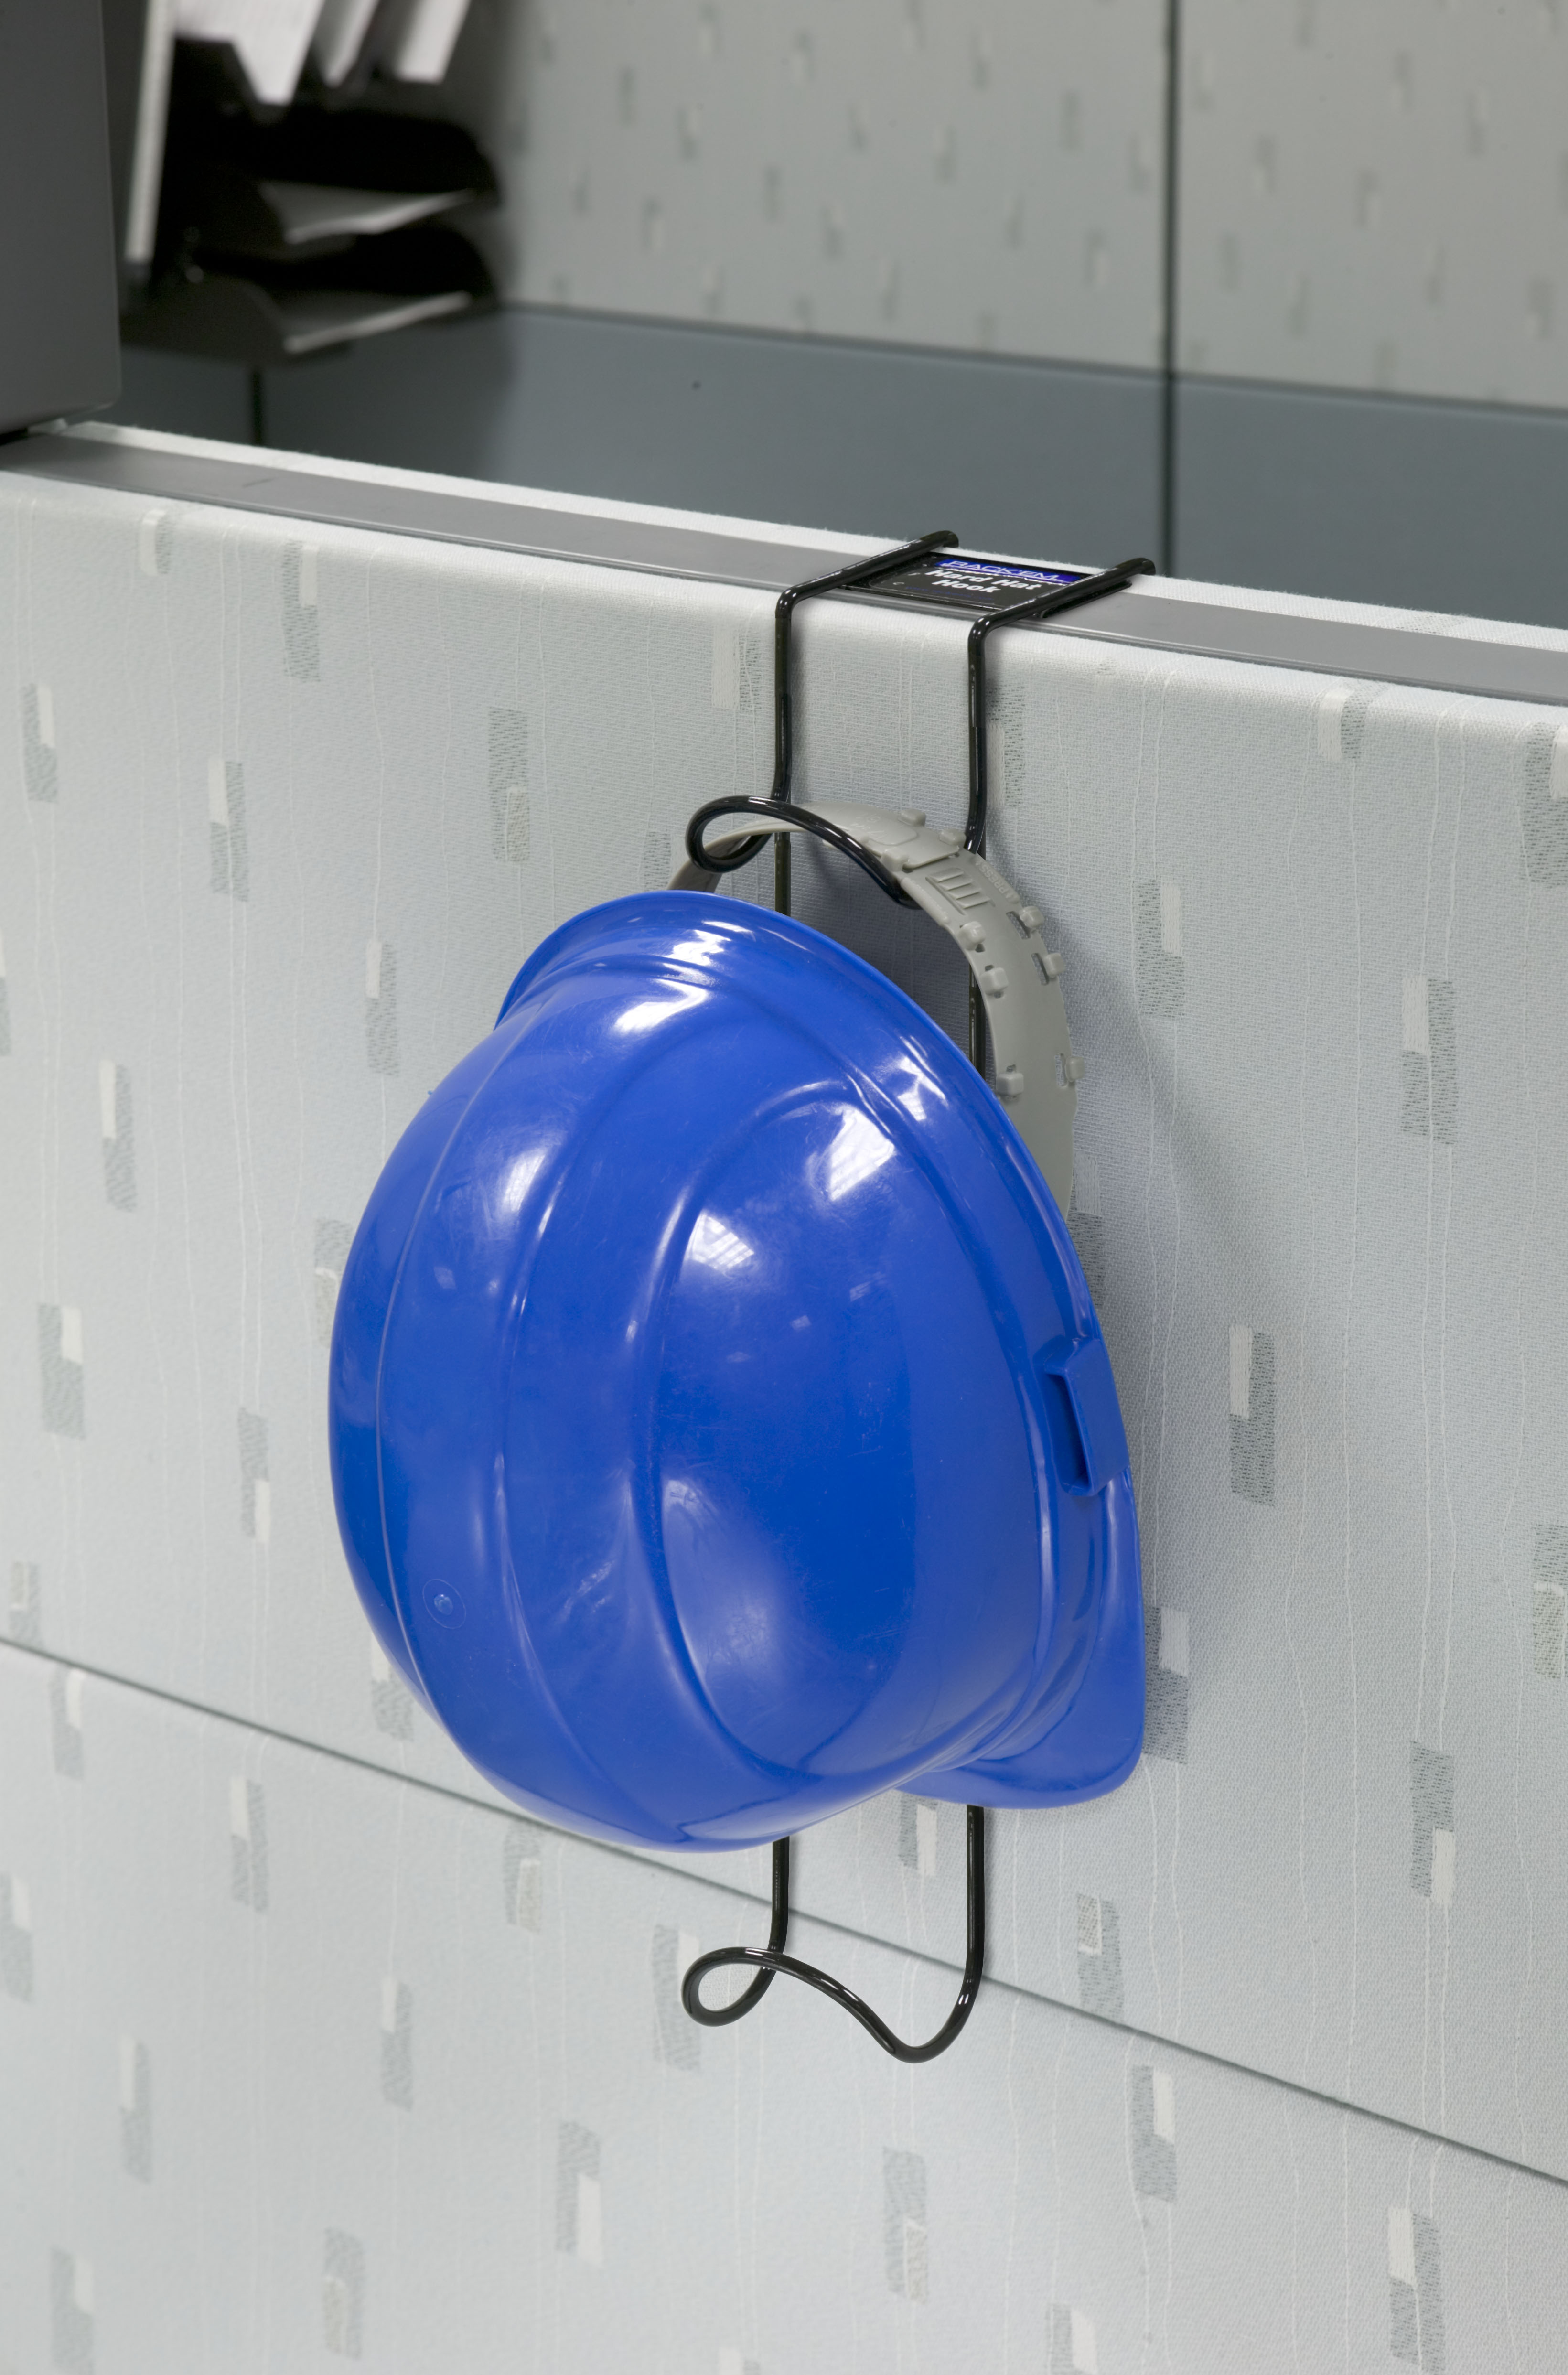 2-Hook Over-the-Cubicle Hard Hat, Coat, Purse Rack Rack, Comply with ANSI  Z89.1-1986 Recommendations. 18.75H x 3W x 6.5D (SKU: 5007)